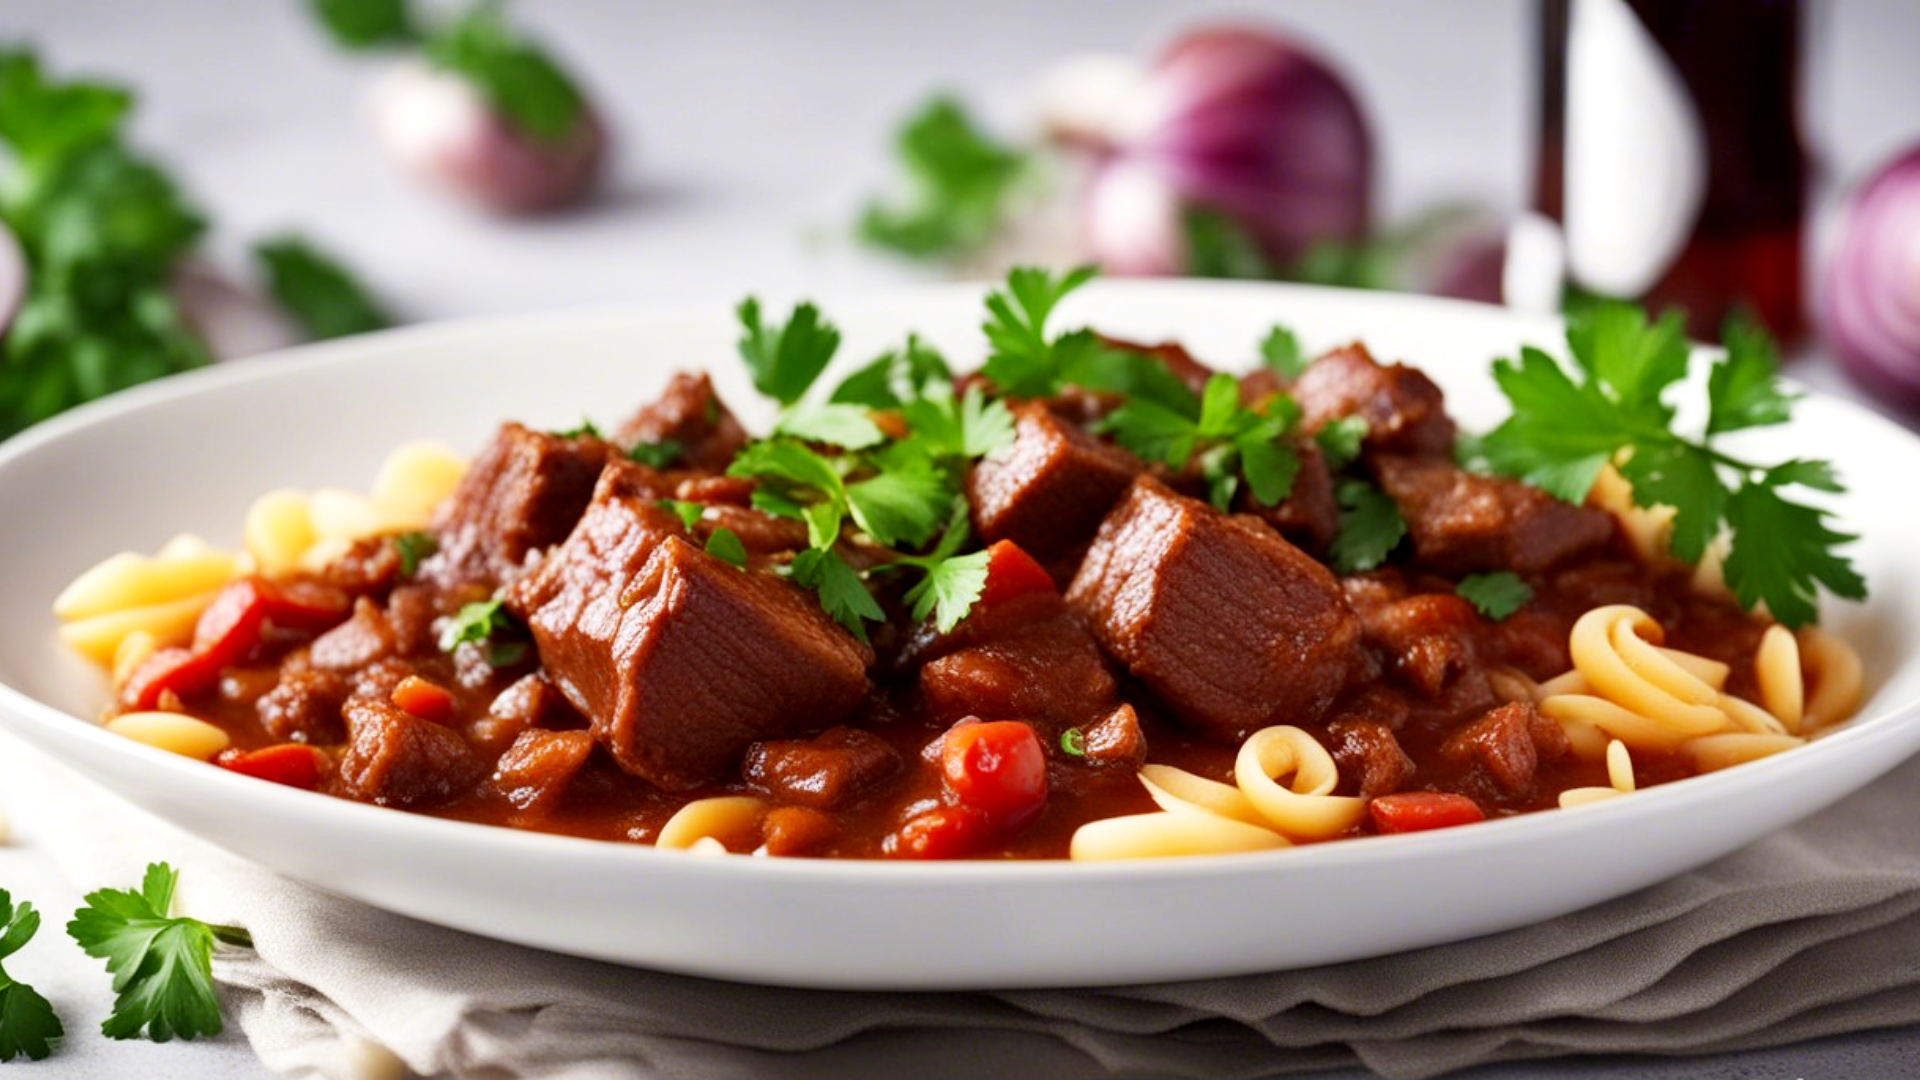 Authentic Hungarian Goulash Recipe {Cooking Hungarian Beef Goulash with Red Wine}